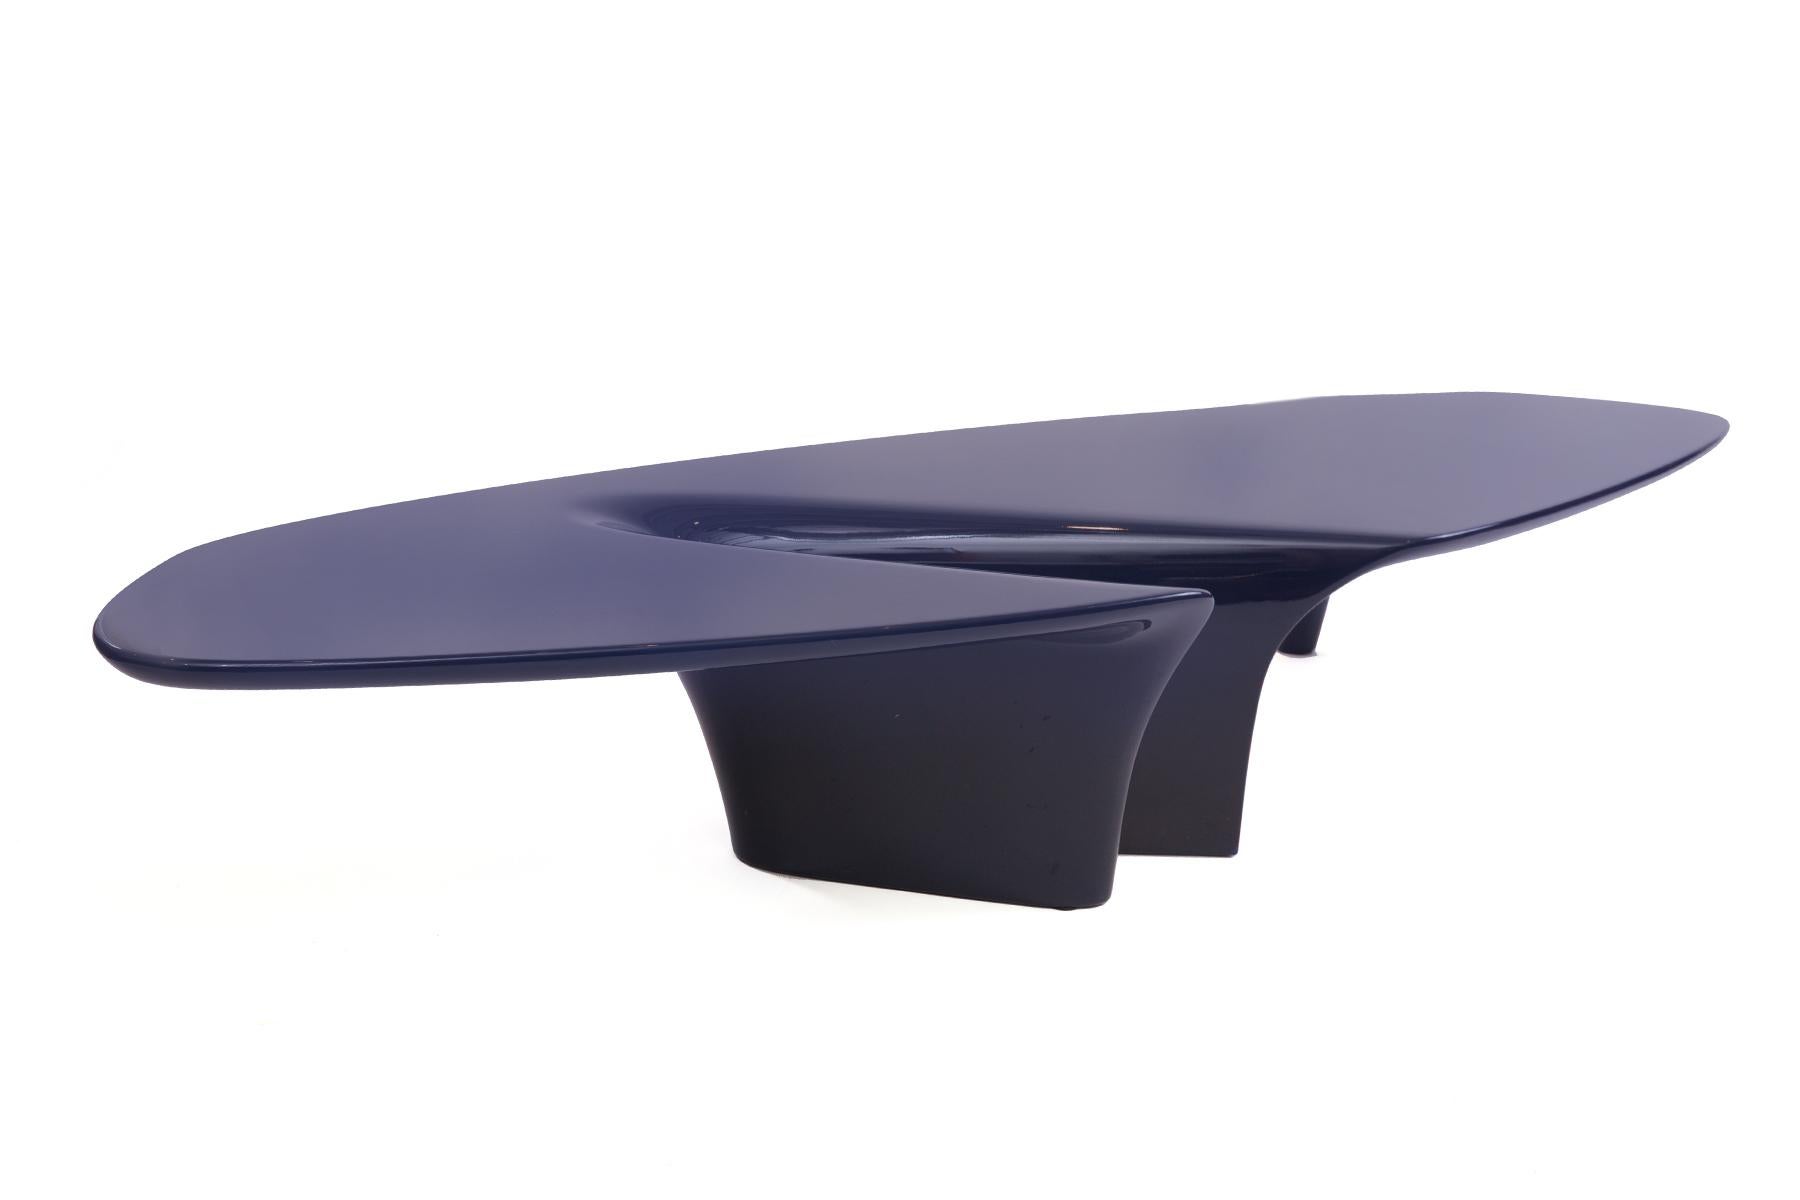 This avant-garde waterfall coffee table, designed by Fredrikson Stallard for the Italian Driade brand is made with lacquered polyurethane in a deep ocean blue. The table features an expressive waterfall-like depression in the center of the top